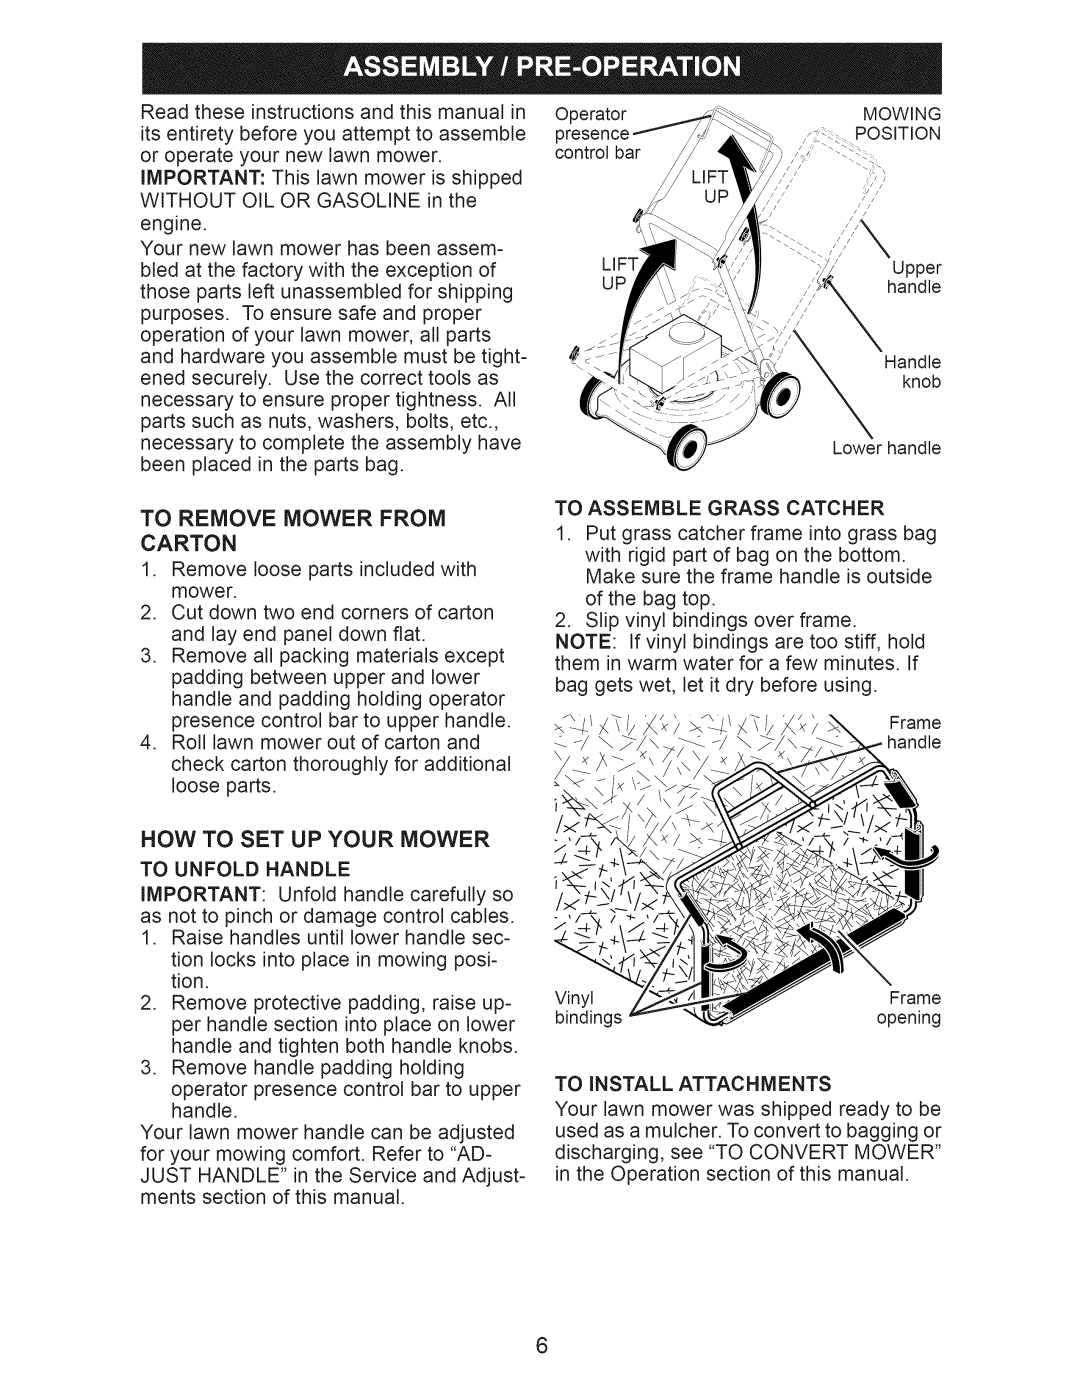 Craftsman 917.389062 owner manual To Remove Mower From Carton, Now To Set Up Your Mower 